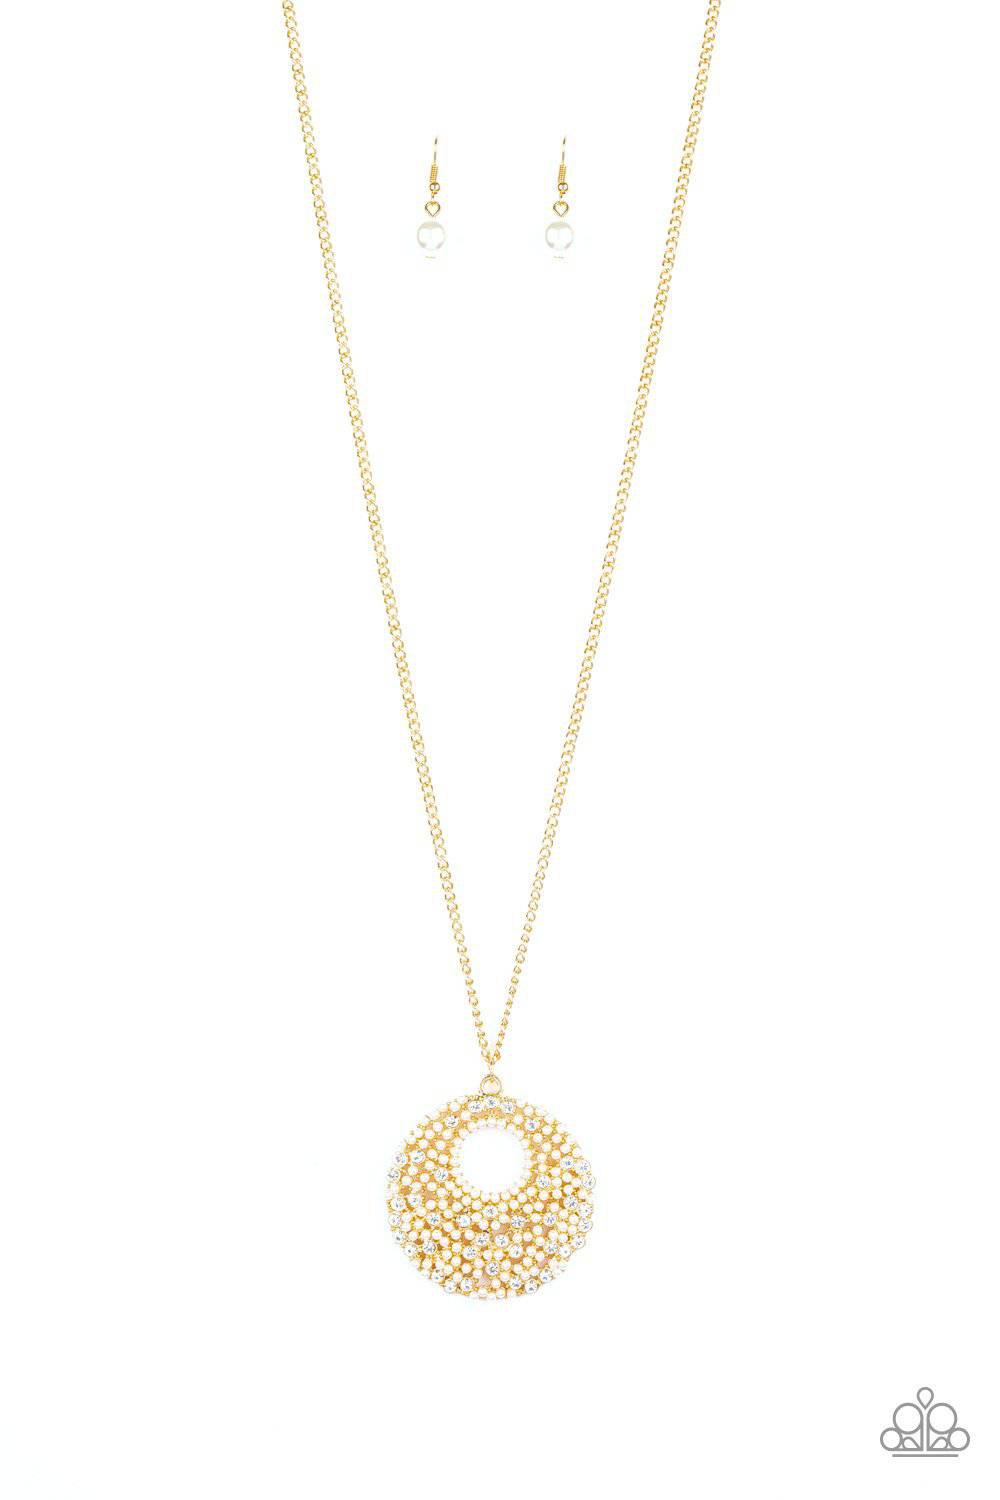 A39 - Pearl Panache Gold Necklace by Paparazzi Accessories on Fancy5Fashion.com